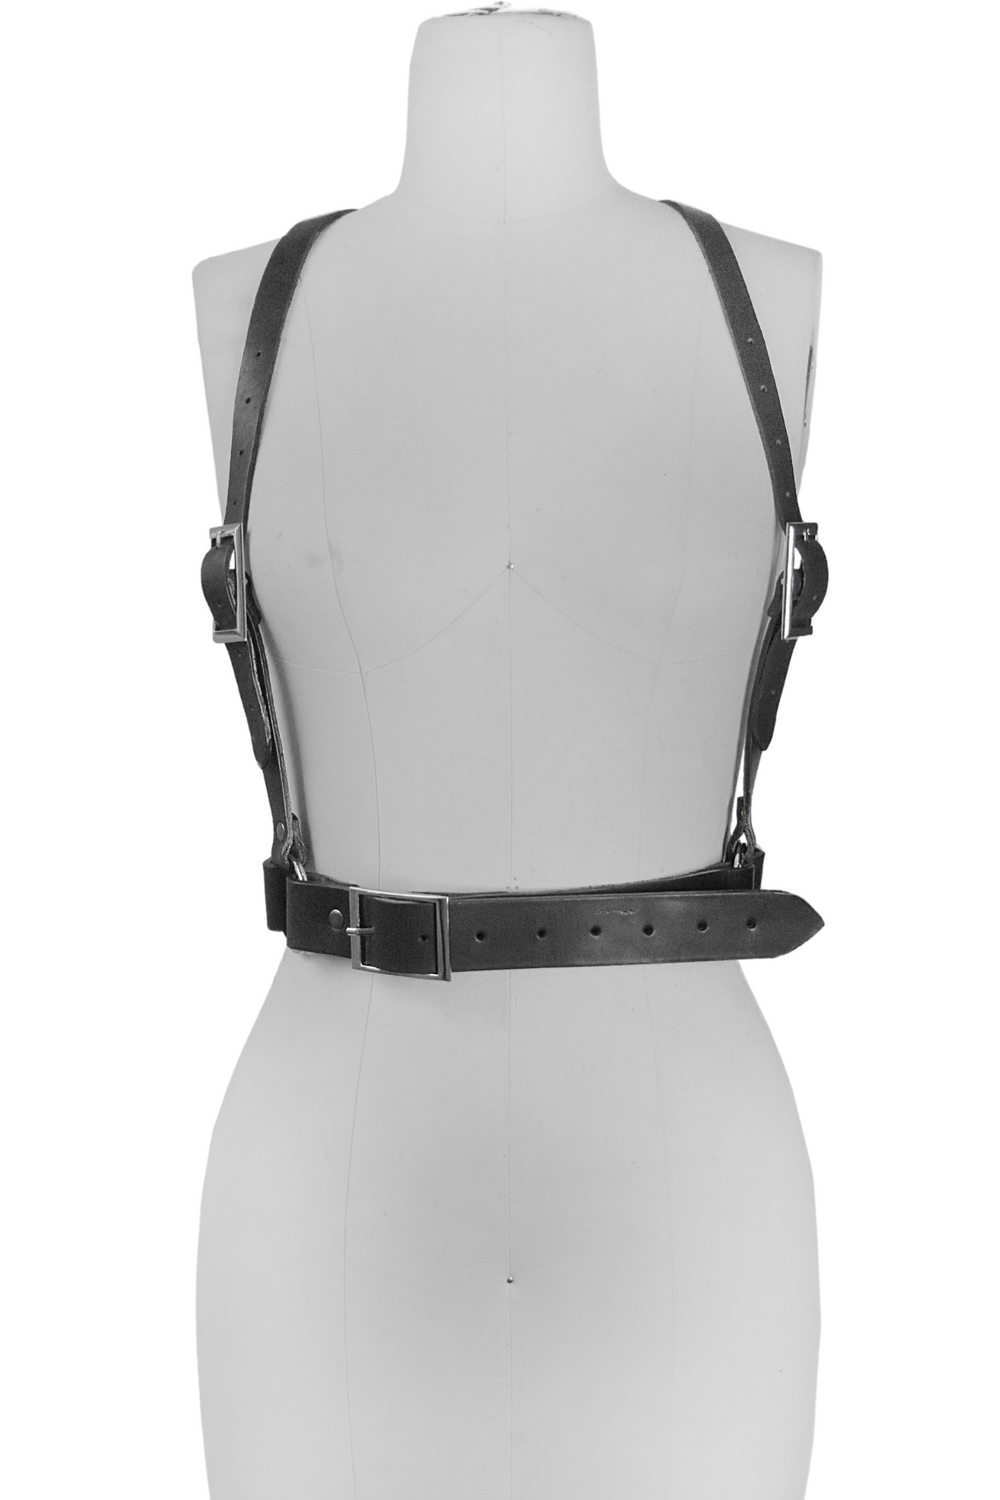 CHAIN BACK LEATHER HARNESS